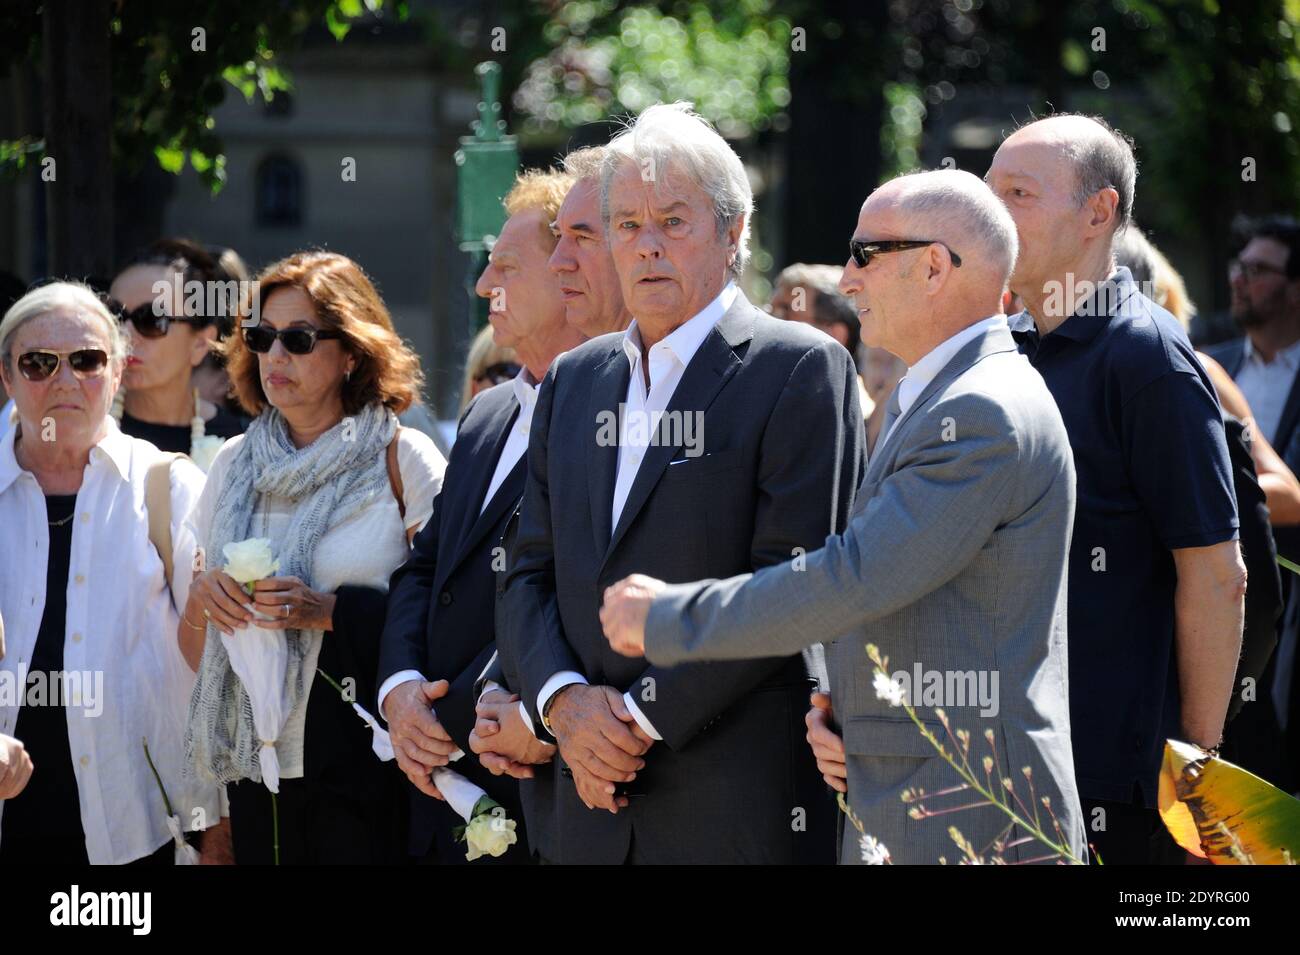 Robert Namias, Alain Delon, Francois Bayrou attending the funeral of French actress Valerie Lang at the Montparnasse cemetery in Paris, France on July 25, 2013. Valerie Lang, the daughter of French former Culture minister Jack Lang, died on July 22 aged 47 following a long illness. Photo by Alban Wyters/ABACAPRESS.COM Stock Photo